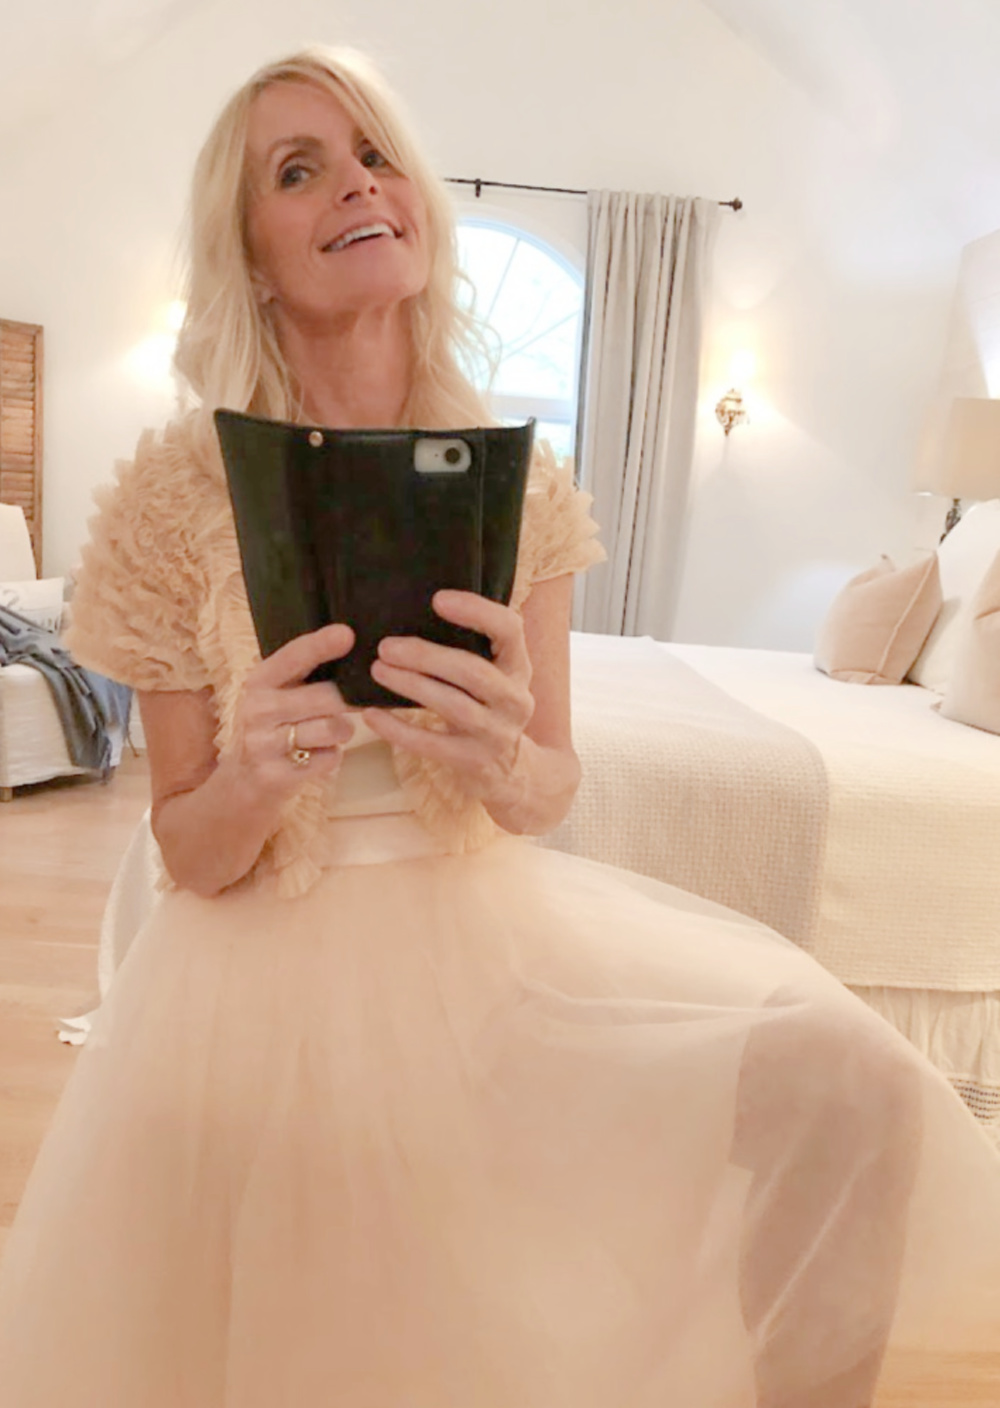 Michele of Hello Lovely in pale pink tutu in serene bedroom.